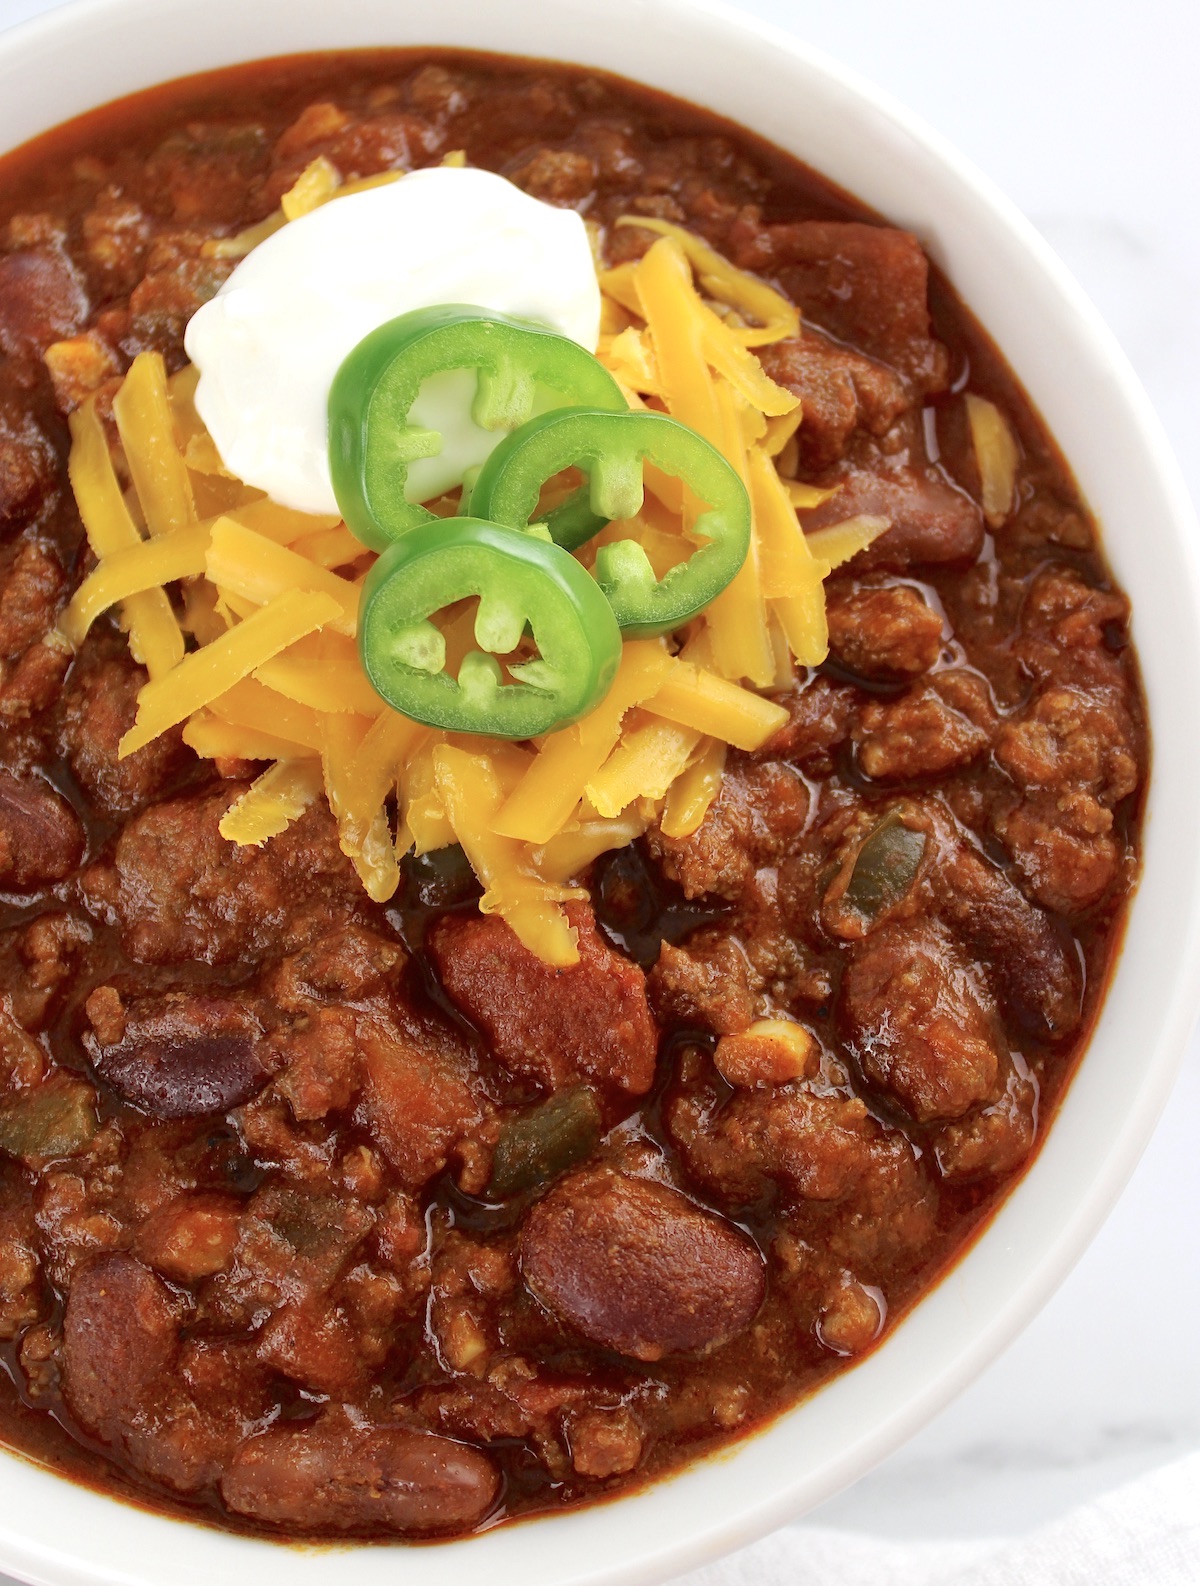 Best Homemade Chili in white bowl with shredded cheese, jalapeno slices and sour cream on top